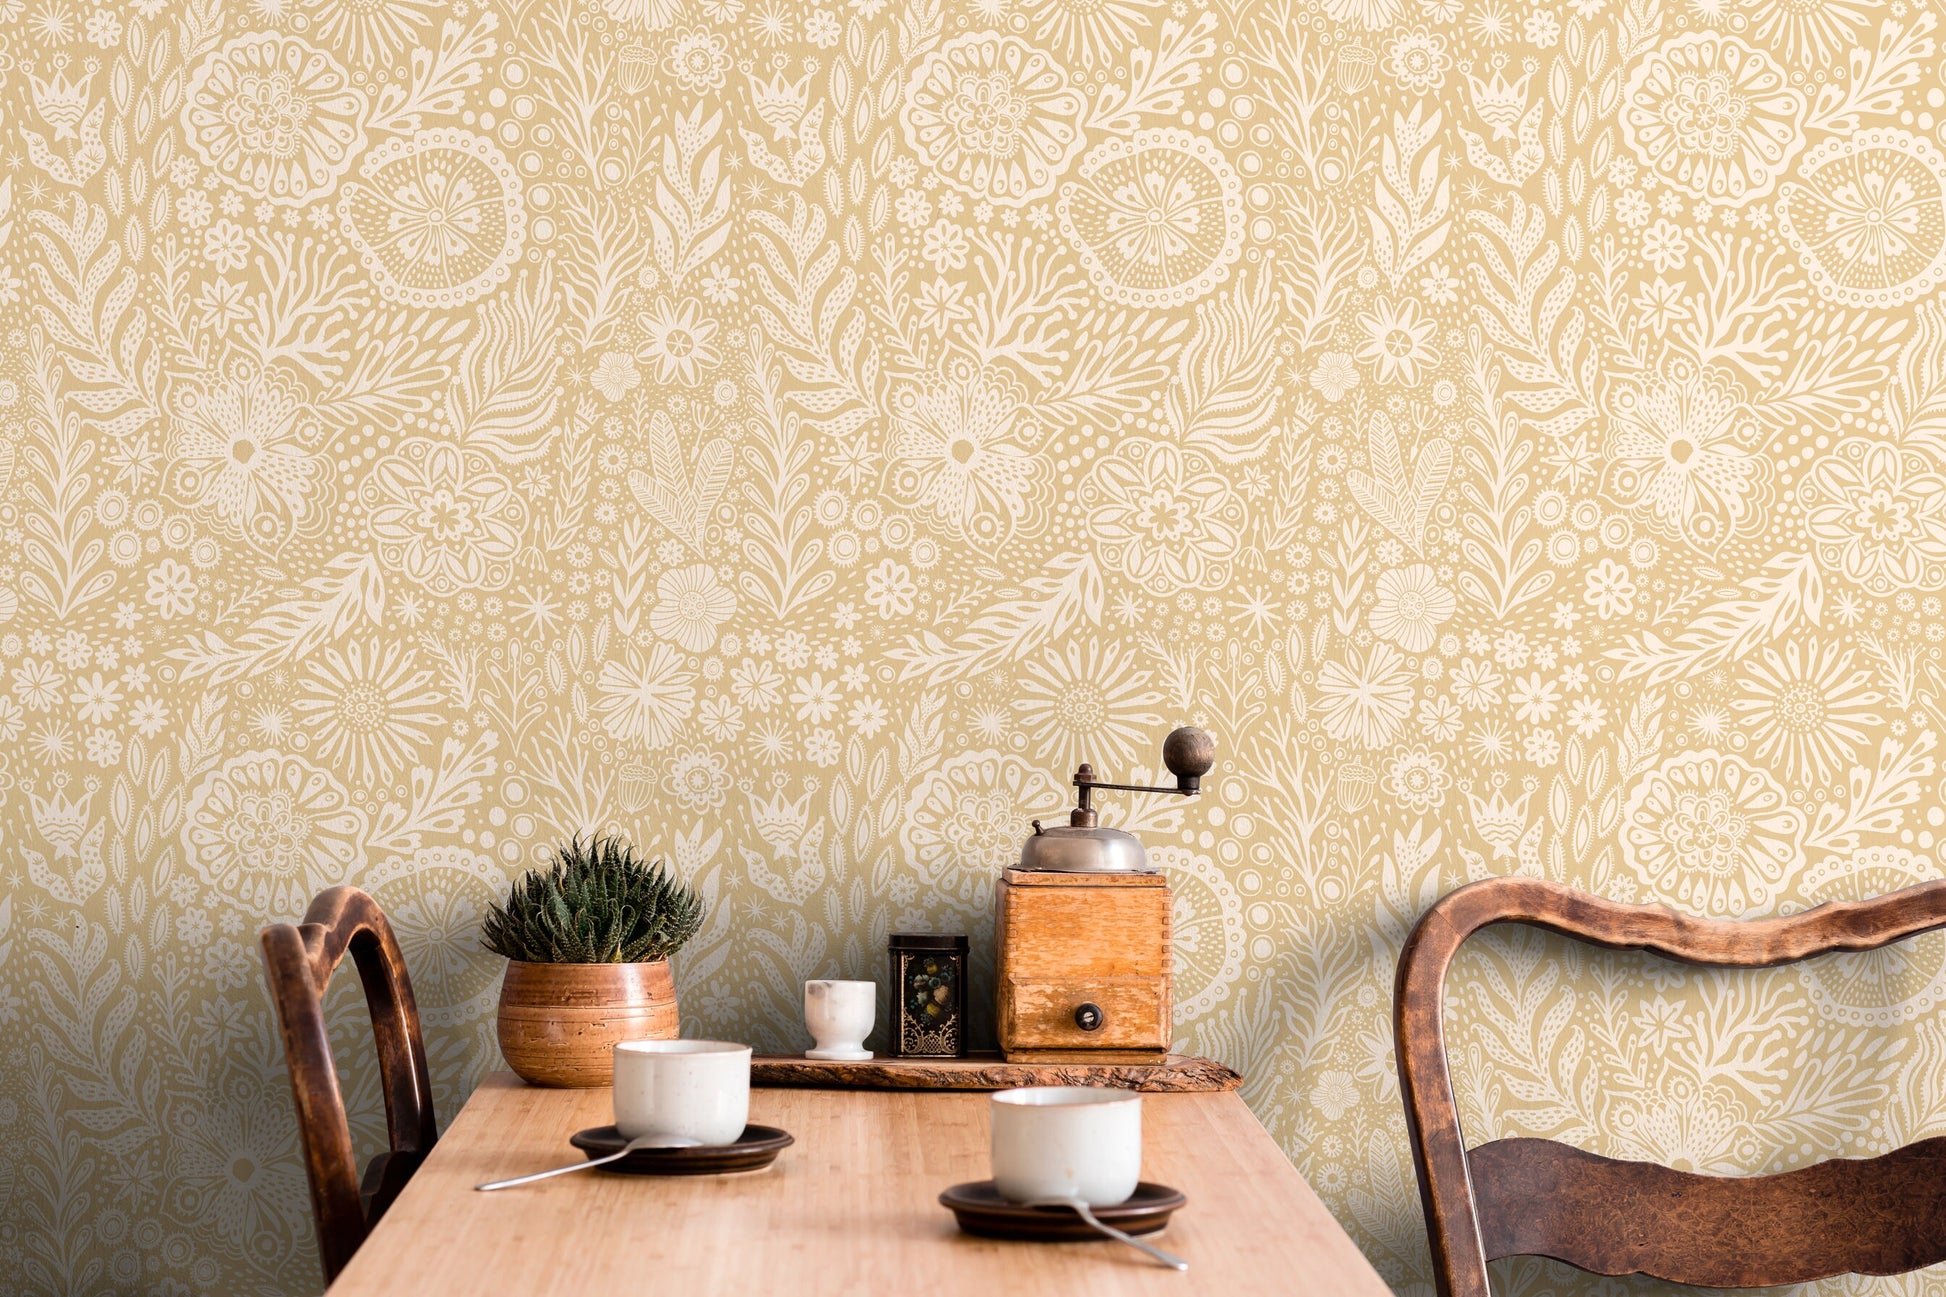 Wallpaper Peel and Stick Wallpaper Removable Wallpaper Home Decor Wall Art Wall Decor Room Decor / Floral Yellow Wallpaper - C434